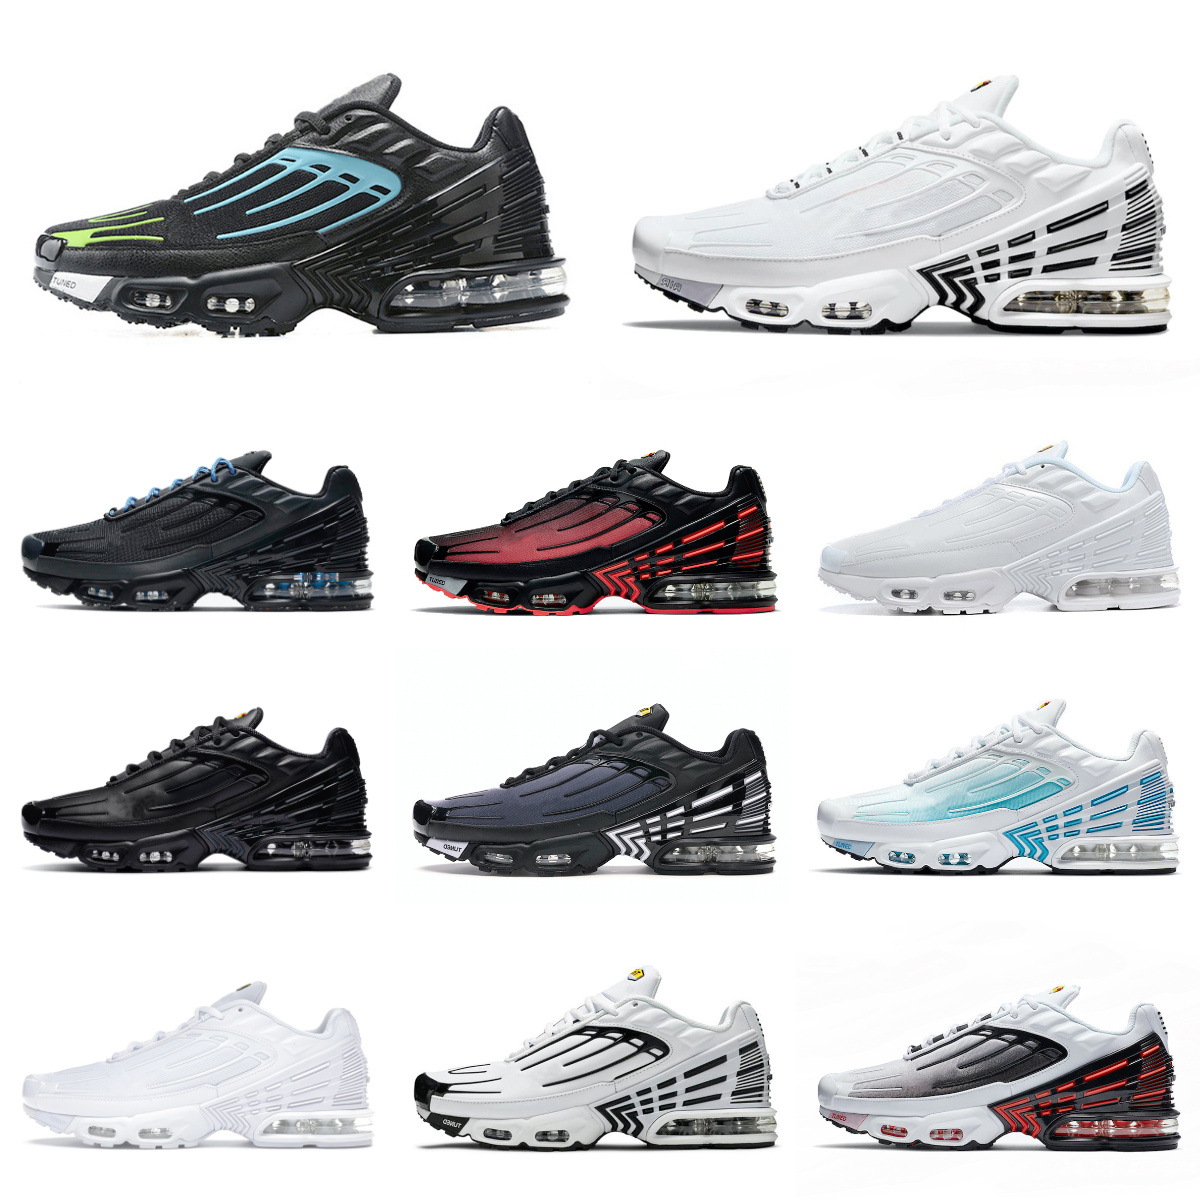 

Discount Tn Plus 3 Tuned Men Sports Shoes III 3s Hyper Violet Deep Parachute Ghost Green Triple Black Laser Blue White Aquamarine Obsidian Leather Trainer Sneakers S9, Please contact us